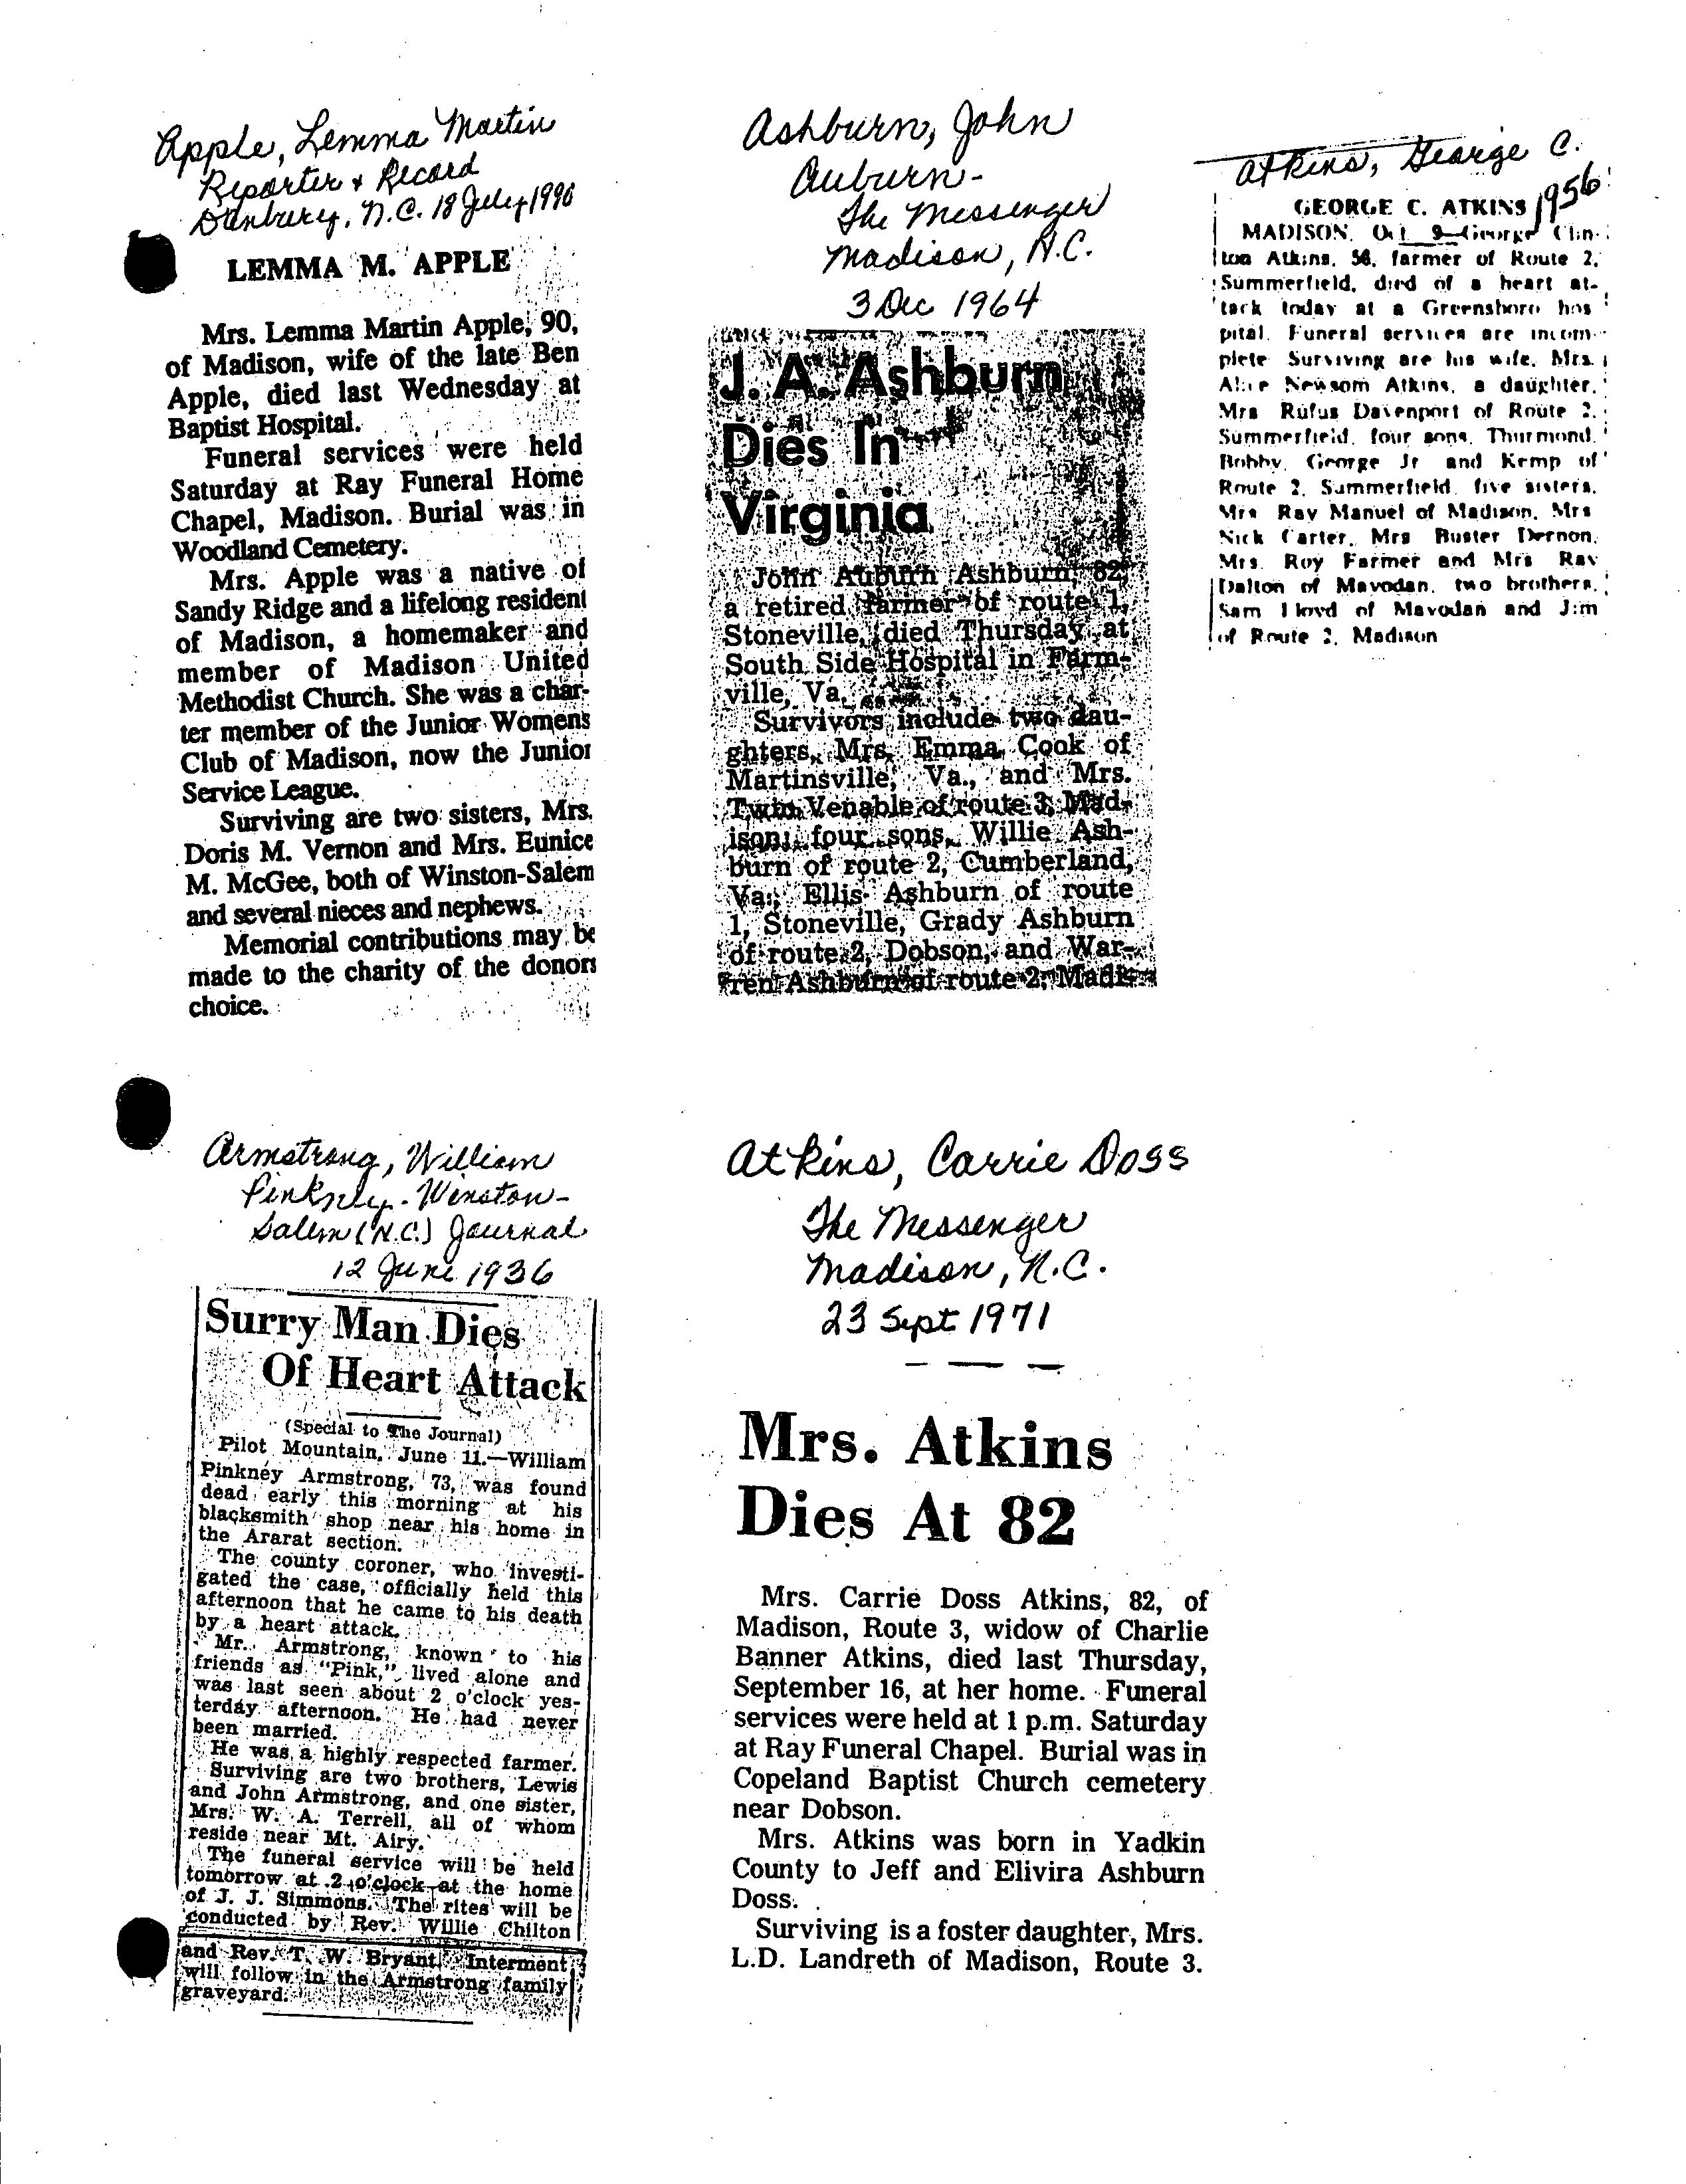 Rockingham County Obituary Clippings, Book 1 [A L]